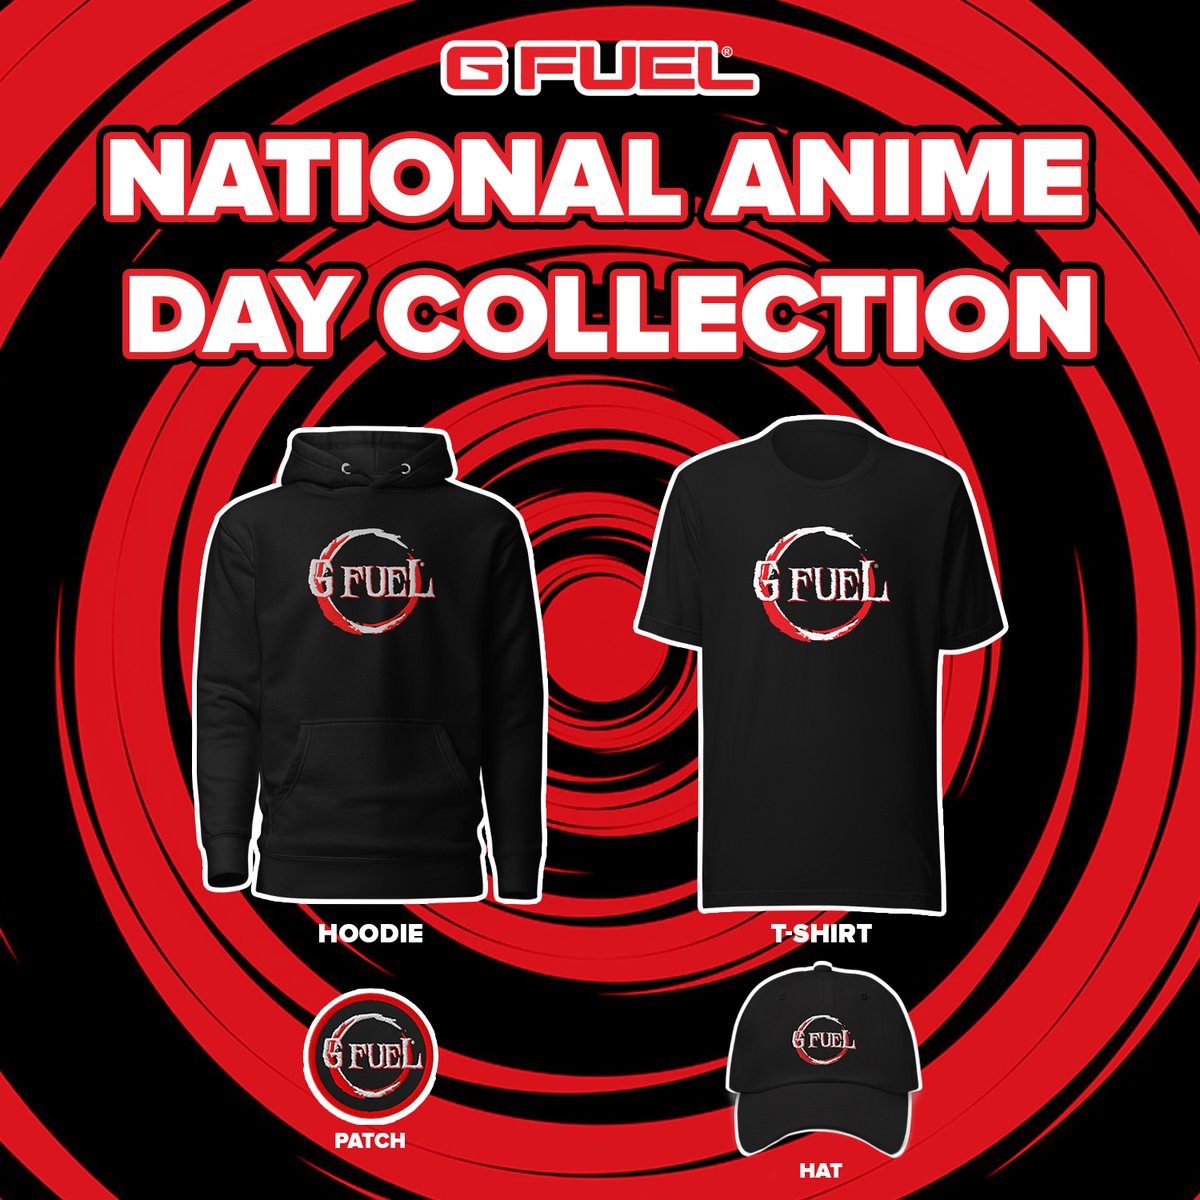 🚨 BABE WAKE UP! #GFUEL JUST LAUNCHED NEW #ANIMEDAY MERCH!

🛒 𝗦𝗛𝗢𝗣: GFUEL.ly/national-anime…